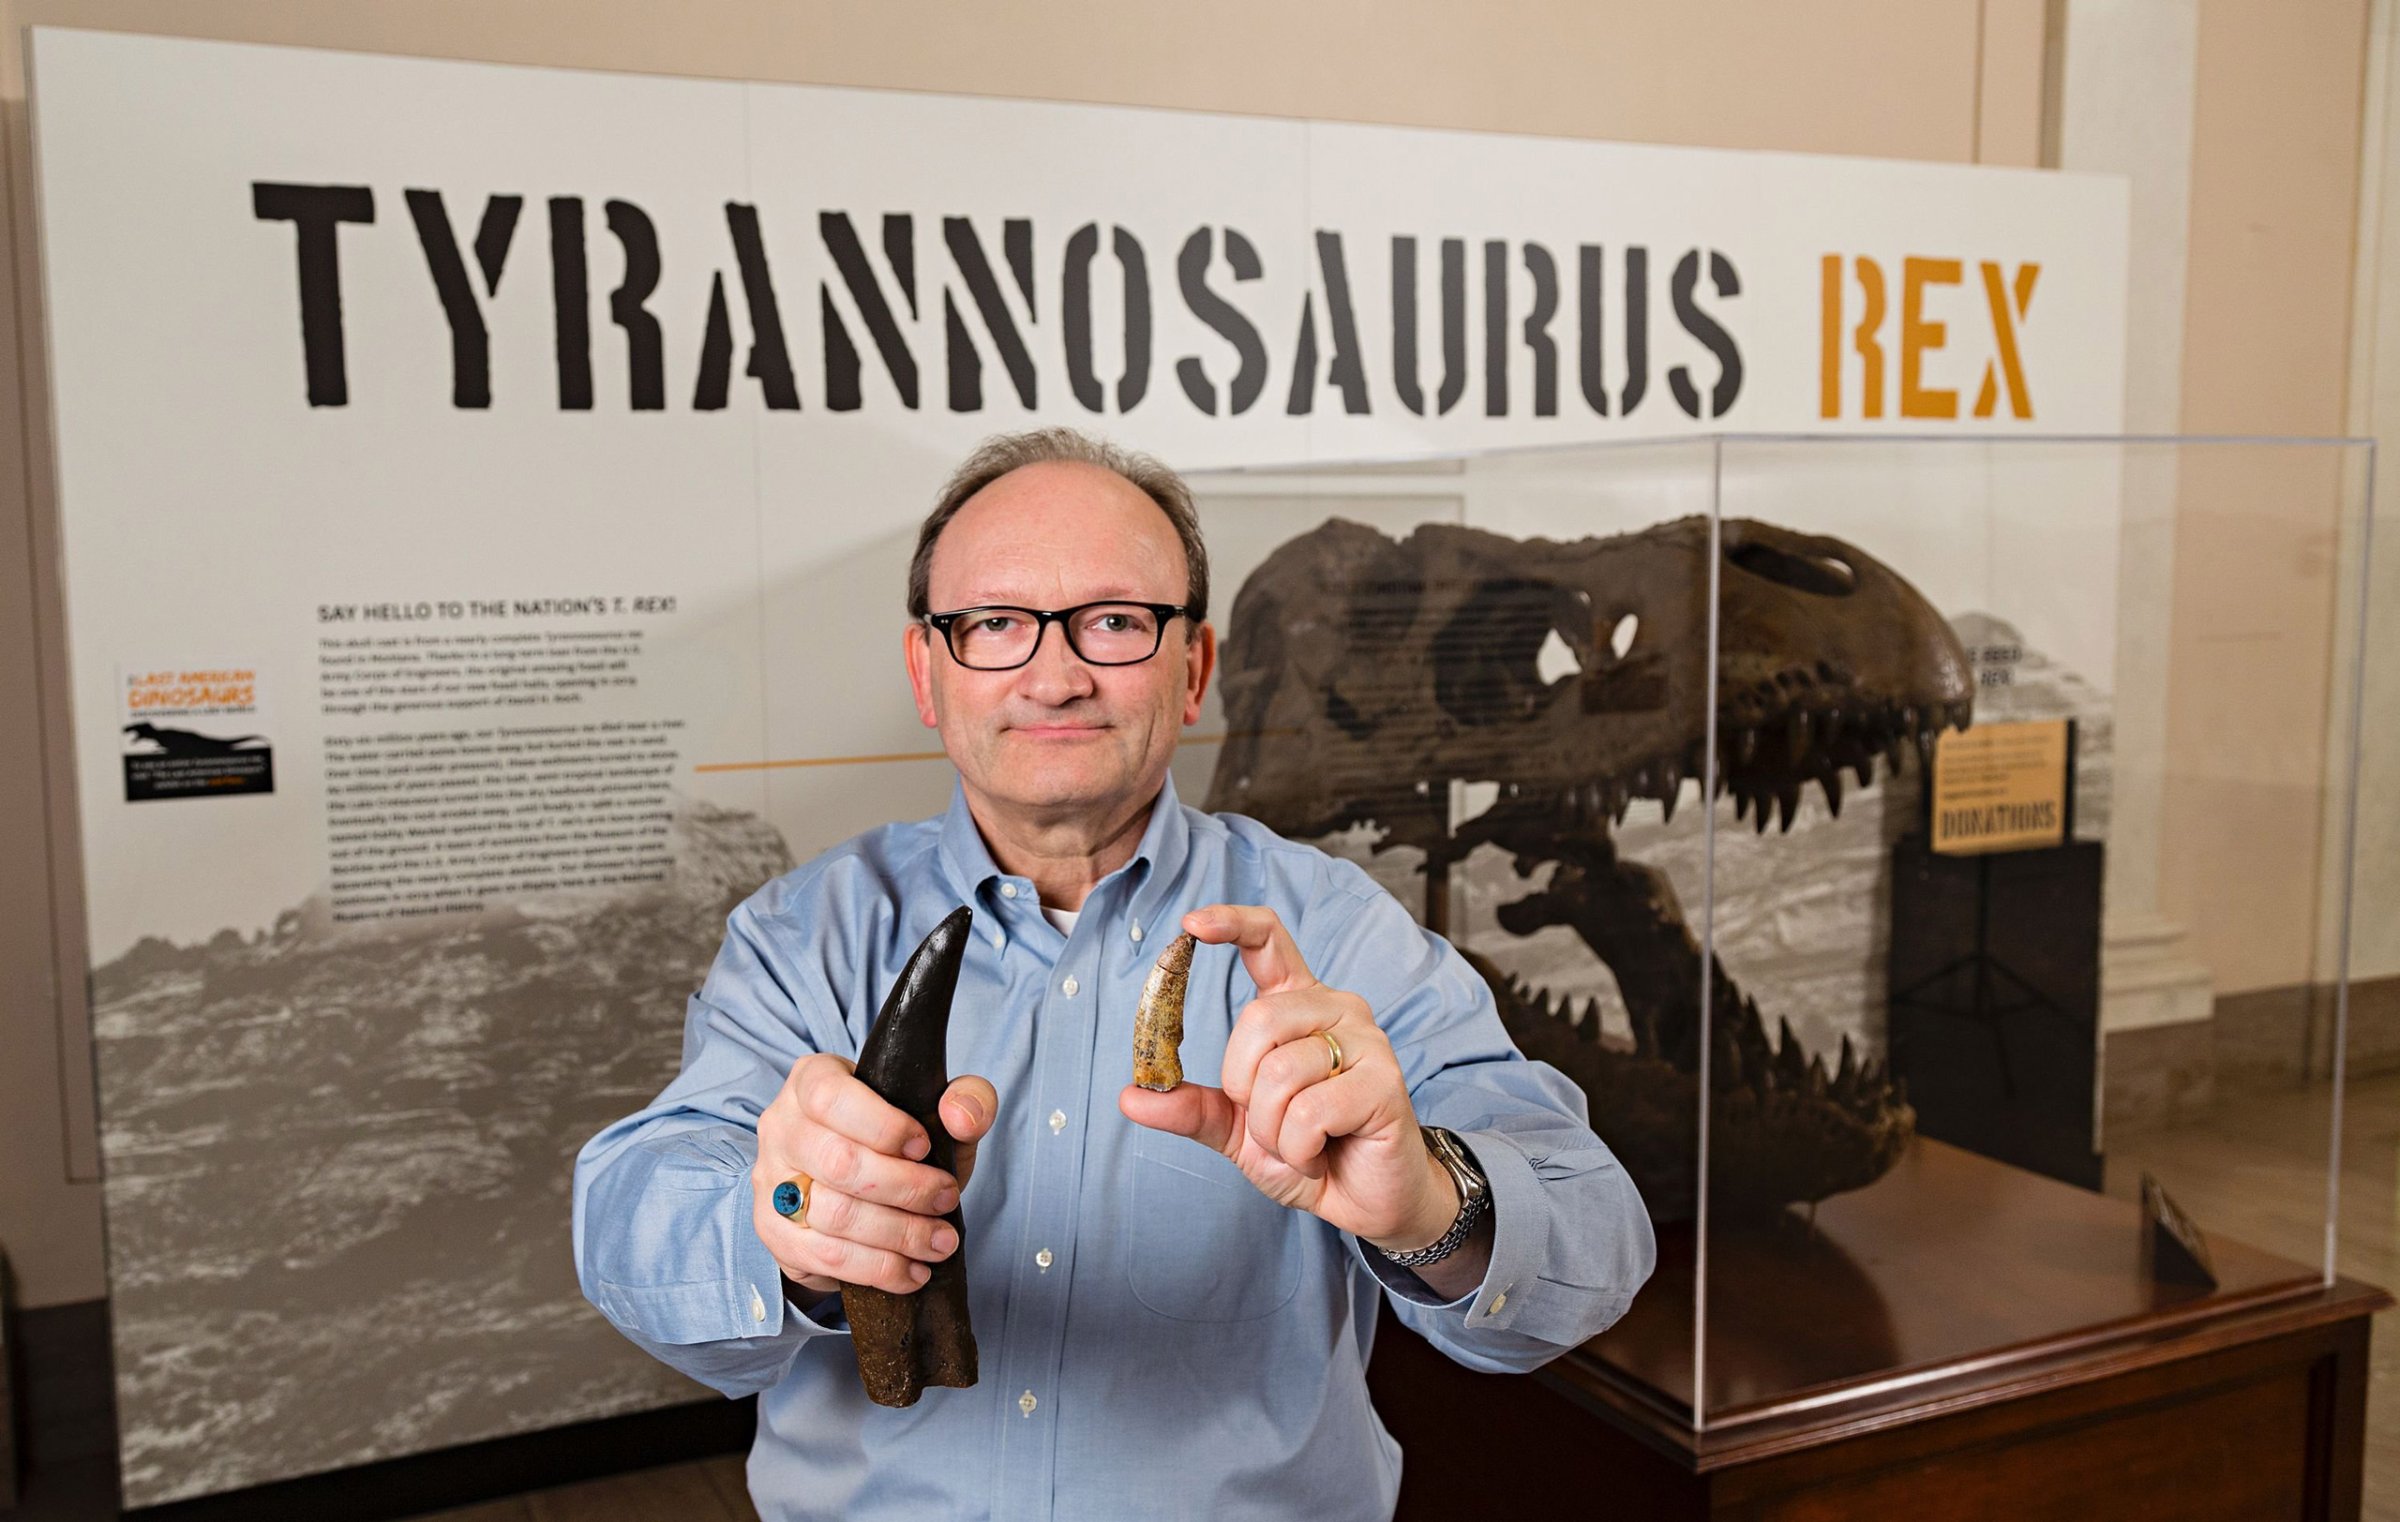 This March 4, 2016 photo provided by the Smithsonian Institution shows Hans Sues, Chair, Department of Paleobiology, National Museum of Natural History, Smithsonian Institution holding a cast (right hand) of a Tyrannosaurus Rex tooth for comparison with an actual tooth of the new tyrannosaur Timurlengia euotica, catalog number 538157, from the Late Cretaceous Period that was found in the Kyzylkum Desert, Uzbekistan. A newly discovered cousin of the T. rex may explain how the legendary dinosaur leapt in size to become undisputed king of the food chain, scientists said March 14, 2016. Until now, researchers have had little evidence of how the iconic predator became one of the largest carnivores to ever roam the Earth before the dinosaurs went extinct 65 million years ago. / AFP PHOTO / Smithsonian Institution / James Di Loreto / RESTRICTED TO EDITORIAL USE - MANDATORY CREDIT "AFP PHOTO / SMITHSONIAN INSTITUTE / JAMES DILORENTO" - NO MARKETING NO ADVERTISING CAMPAIGNS - DISTRIBUTED AS A SERVICE TO CLIENTS == NO ARCHIVE JAMES DI LORETO/AFP/Getty Images